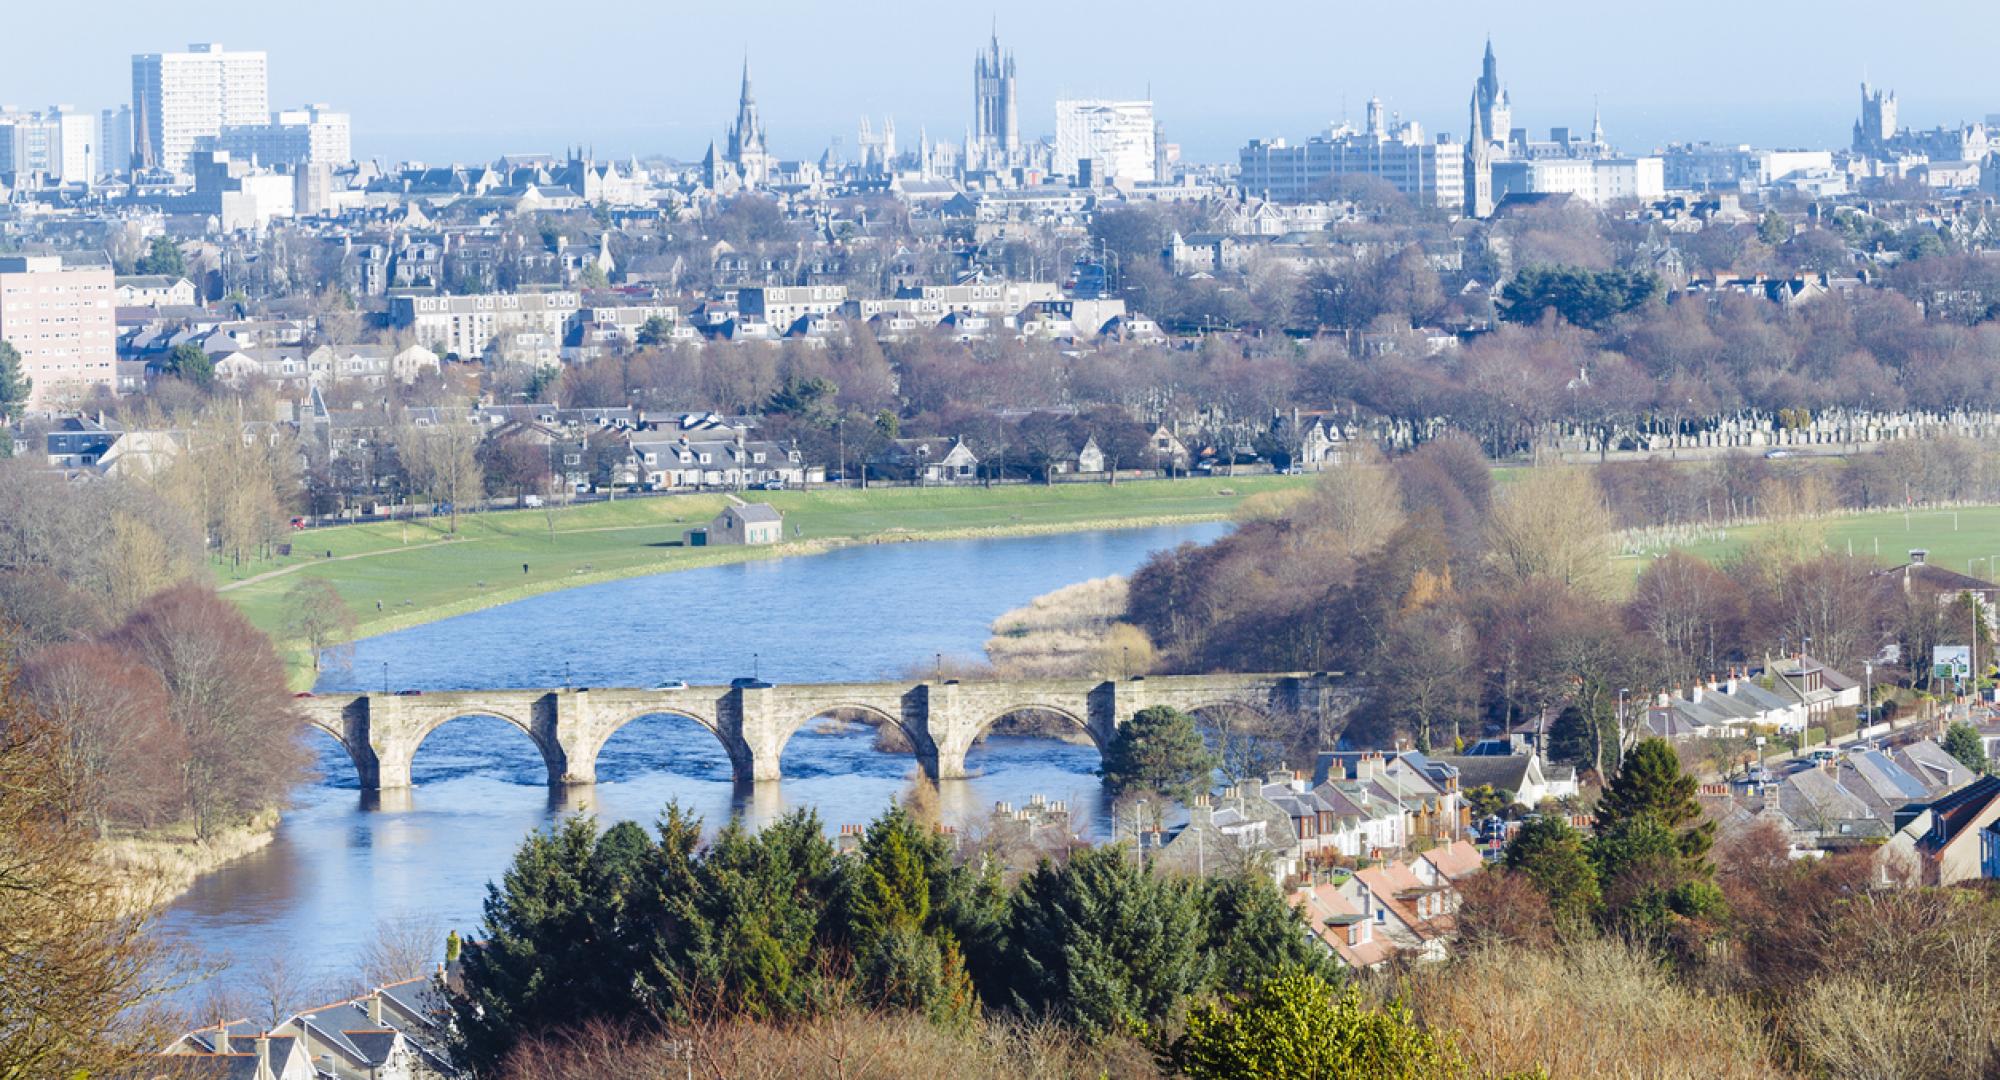 View of Aberdeen with a bridge in the foreground